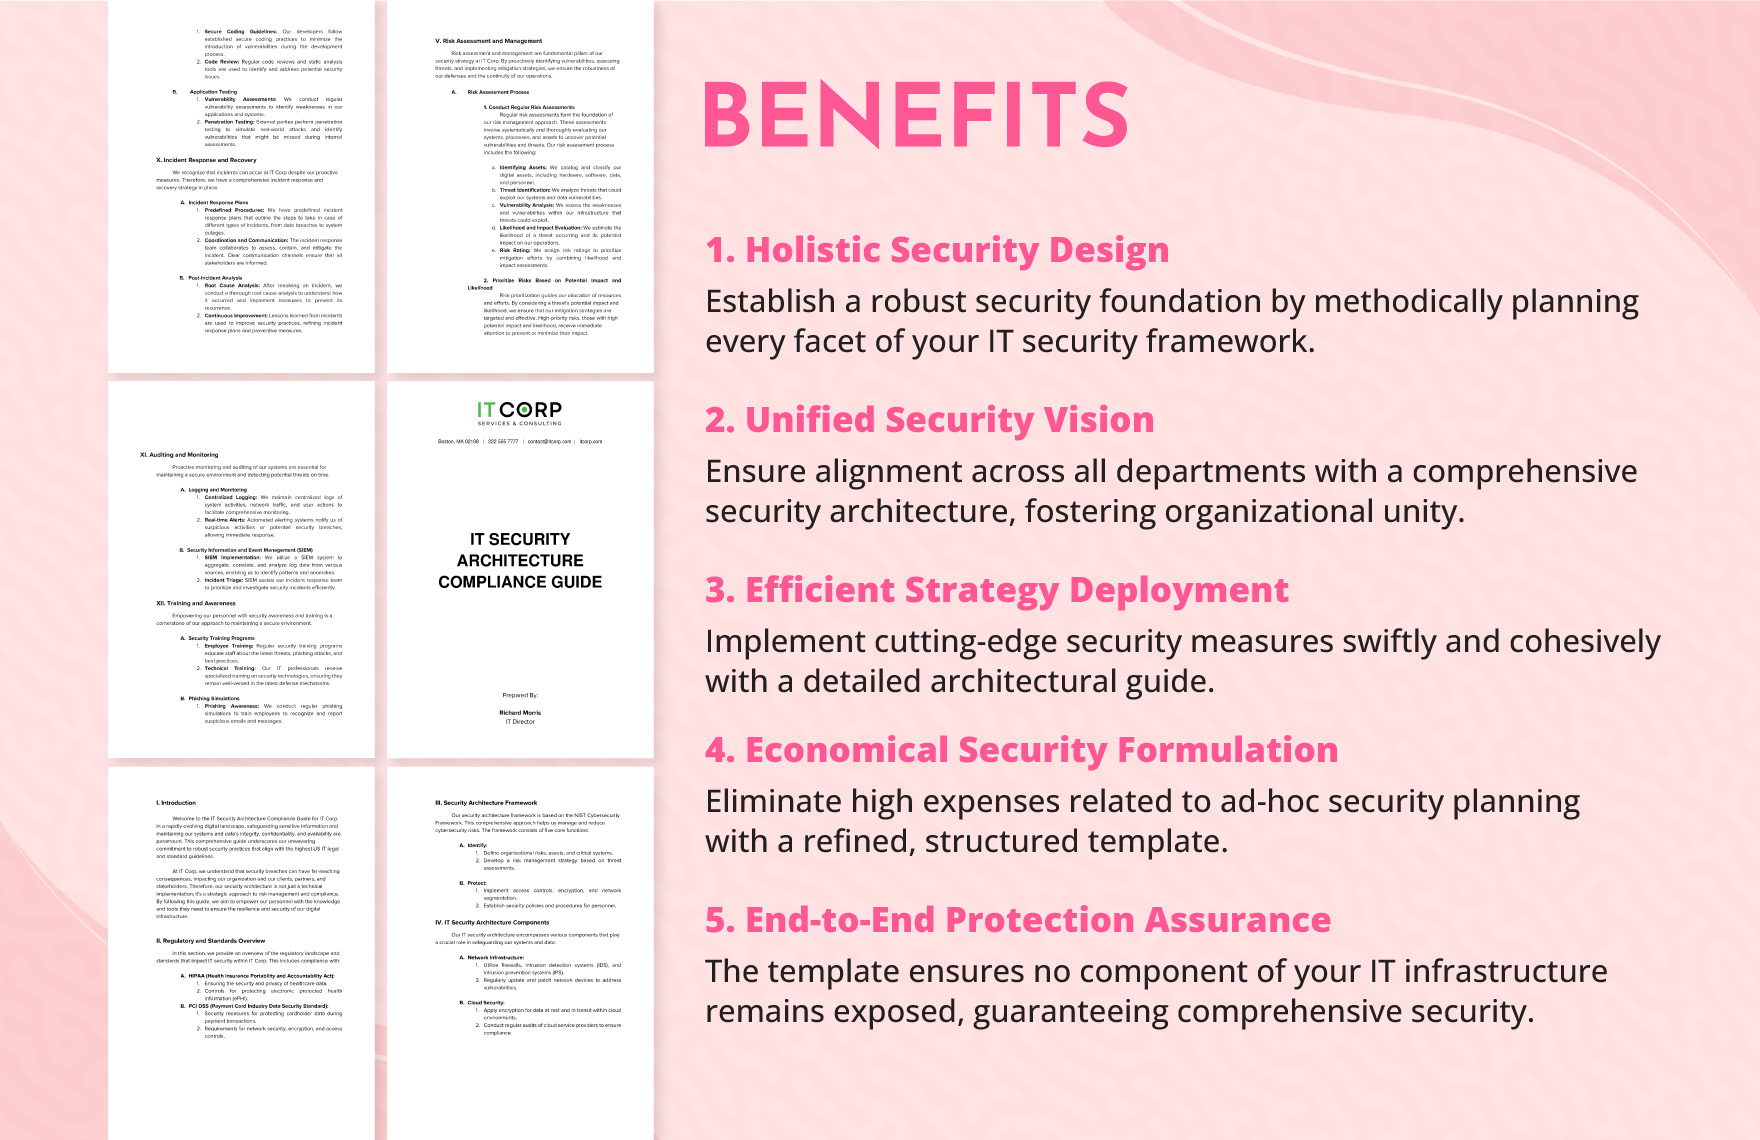 IT Security Architecture Compliance Guide Template